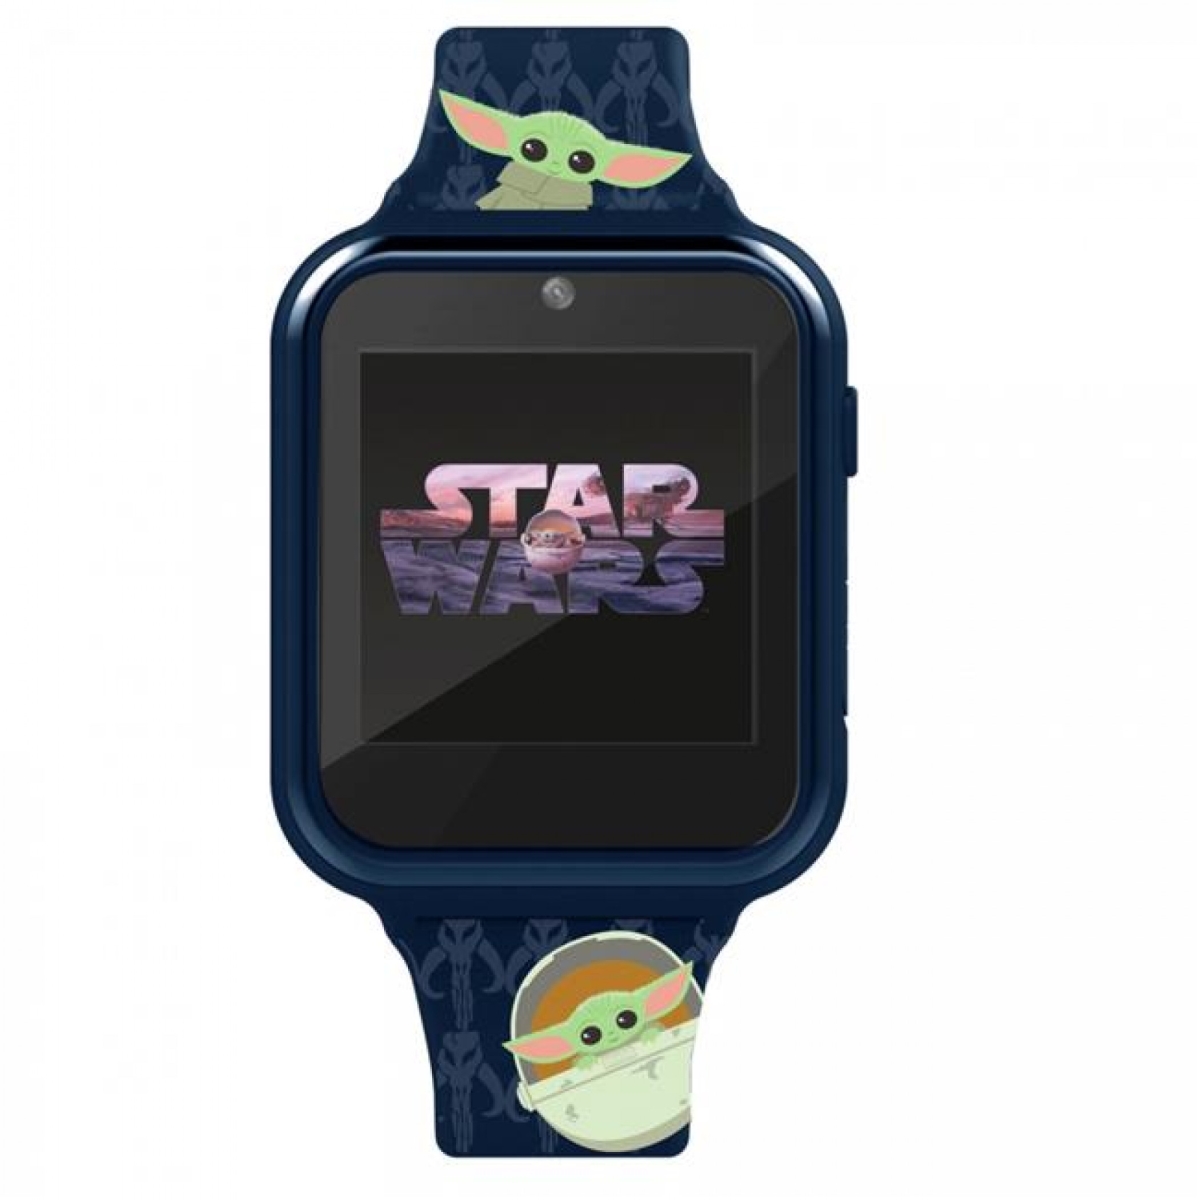 Picture of Star Wars 818360 Accutime the Child from the Mandalorian All Over Print Interactive Kids Watch, Blue